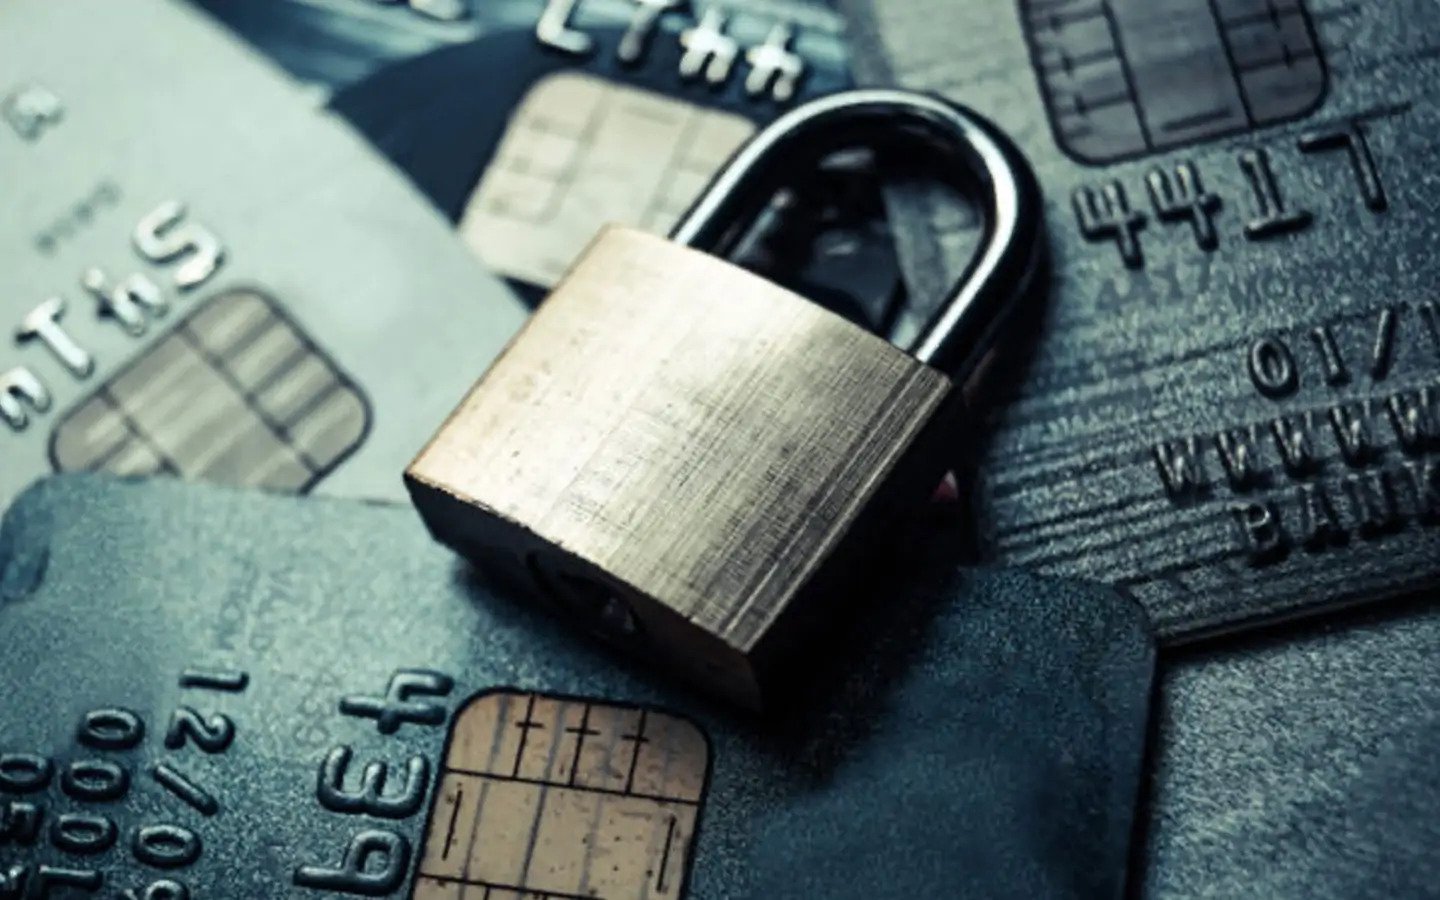 How to Secure Your Credit Card Information